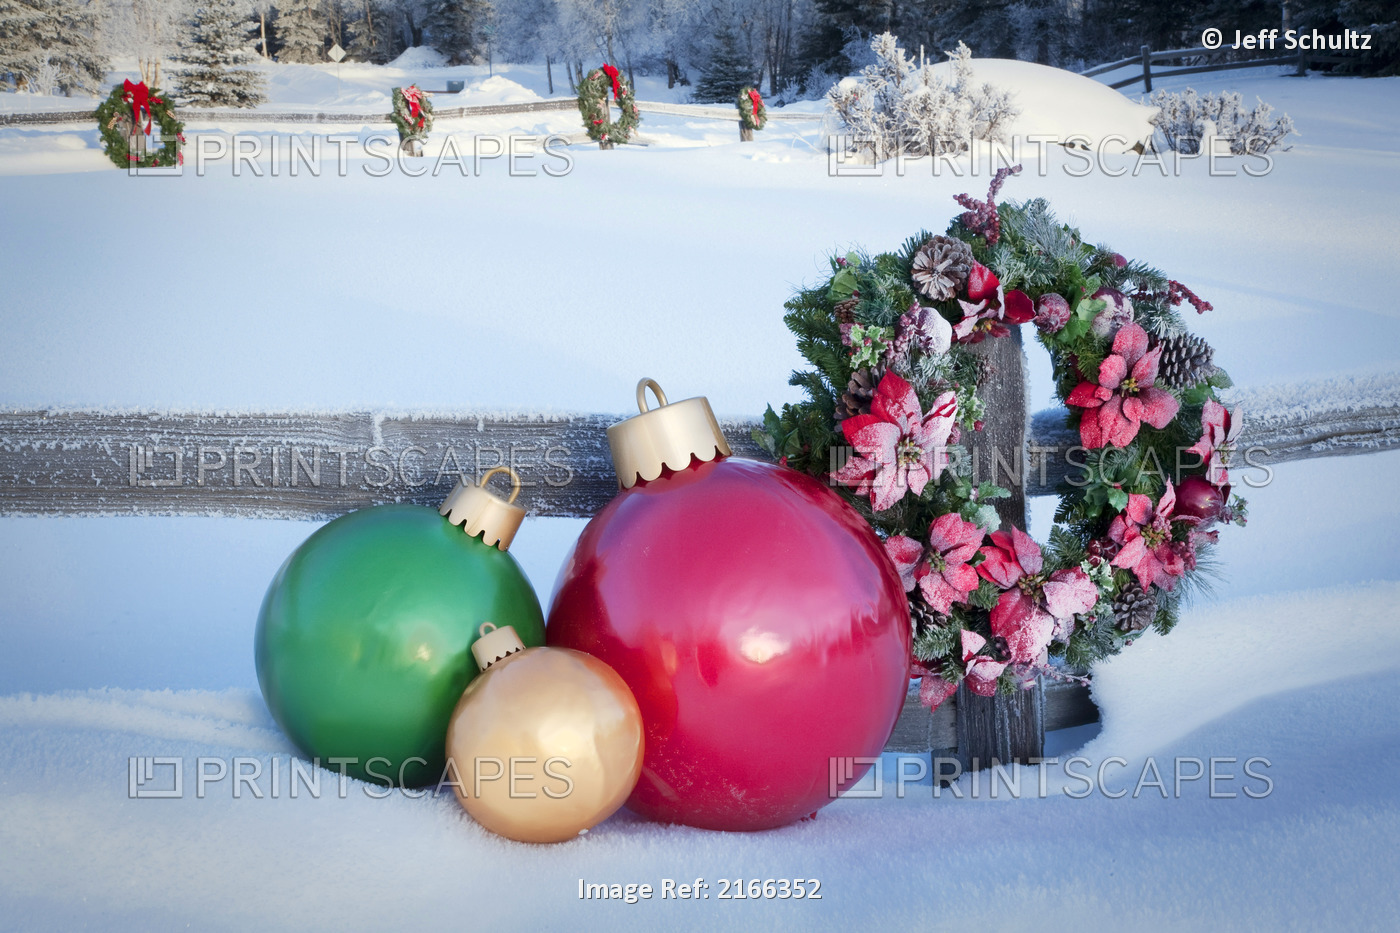 Split Rail Fence Decorated With Christmas Wreaths And Decorations, Anchorage, ...